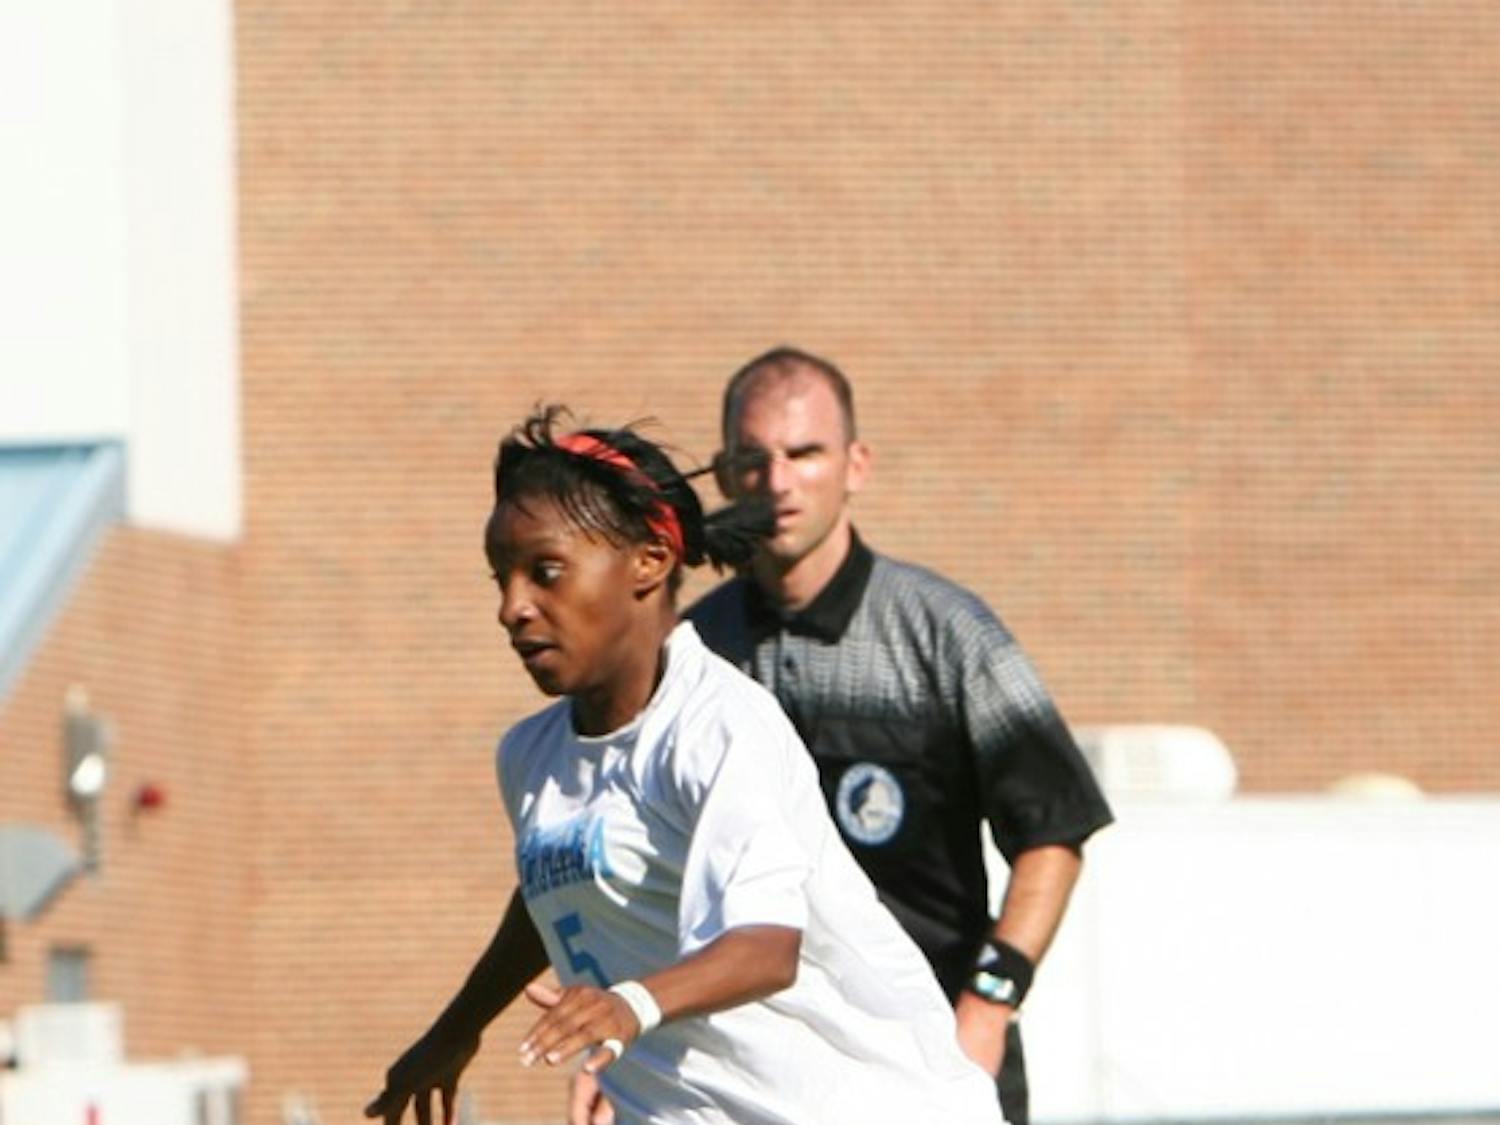 UNC defender Crystal Dunn was named the ACC Defensive Player of the Year on Tuesday. She’s the first freshman to ever receive the award.